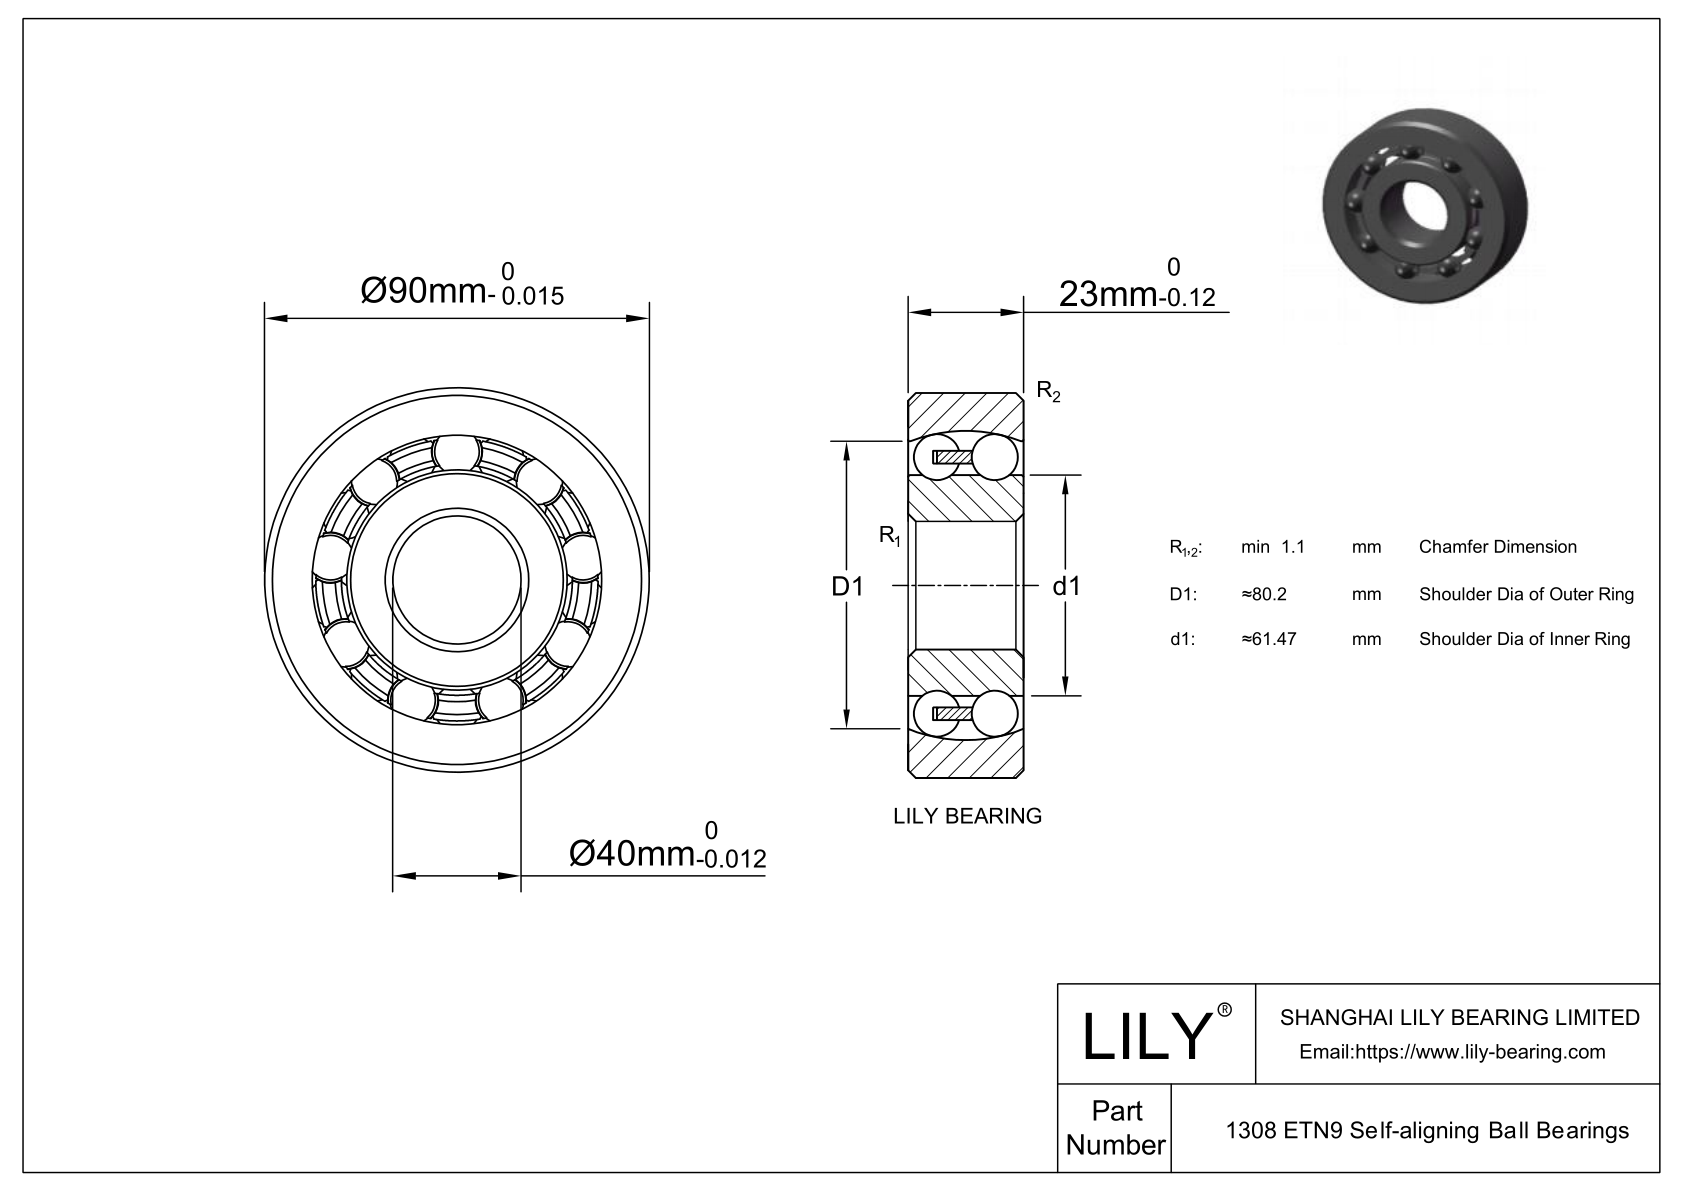 S1308 ETN9 Stainless Steel Self Aligning Ball Bearings cad drawing